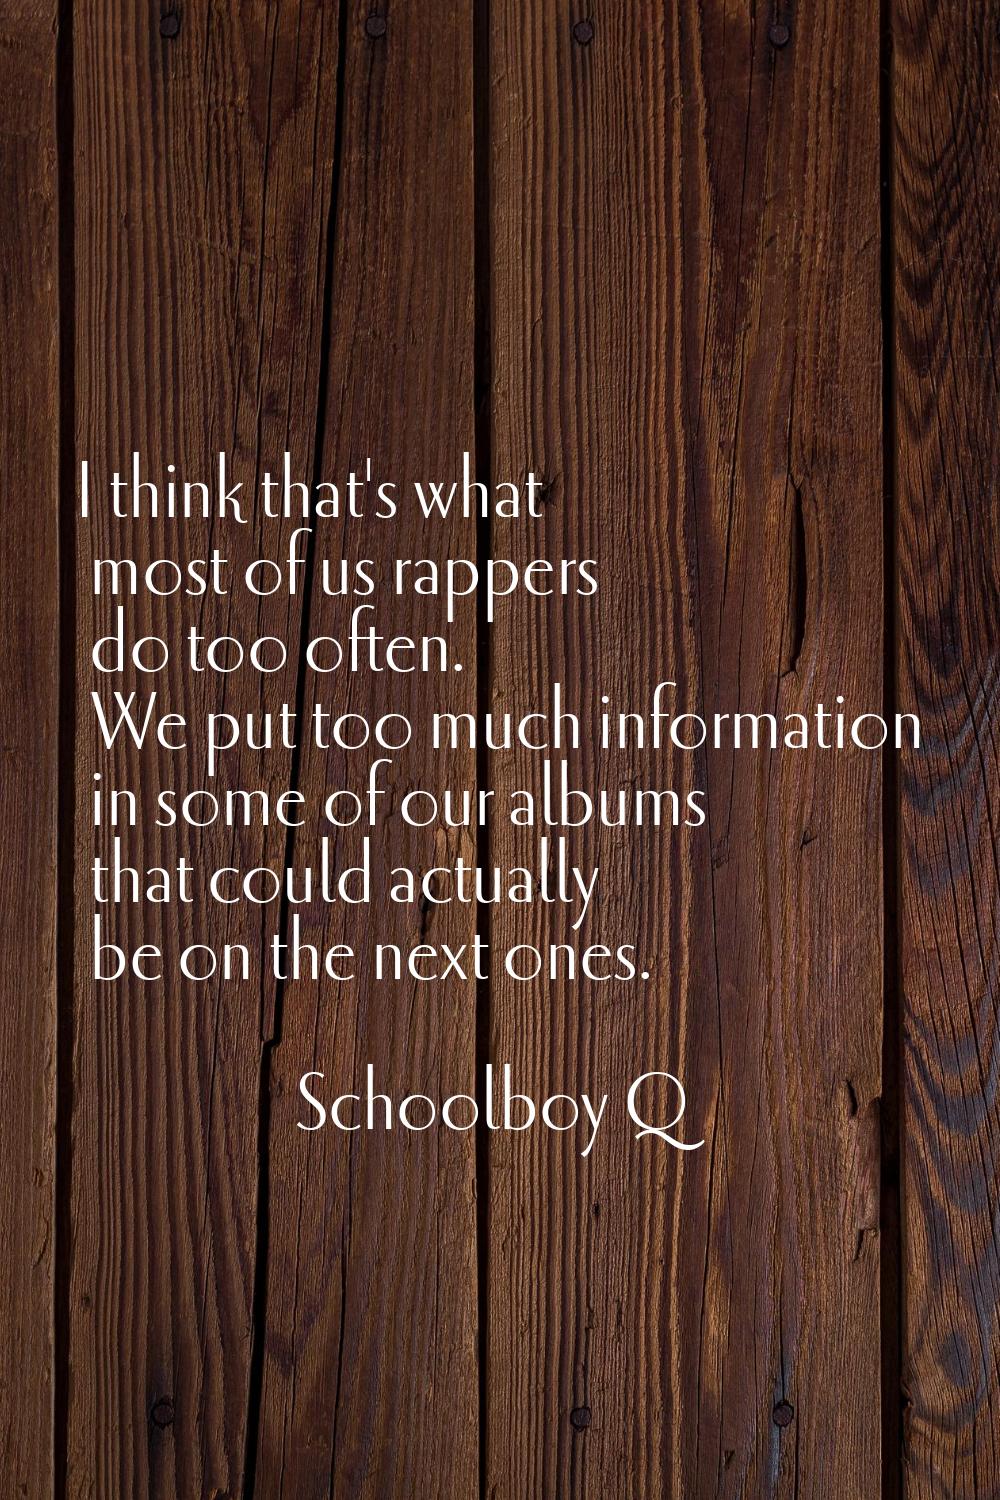 I think that's what most of us rappers do too often. We put too much information in some of our alb